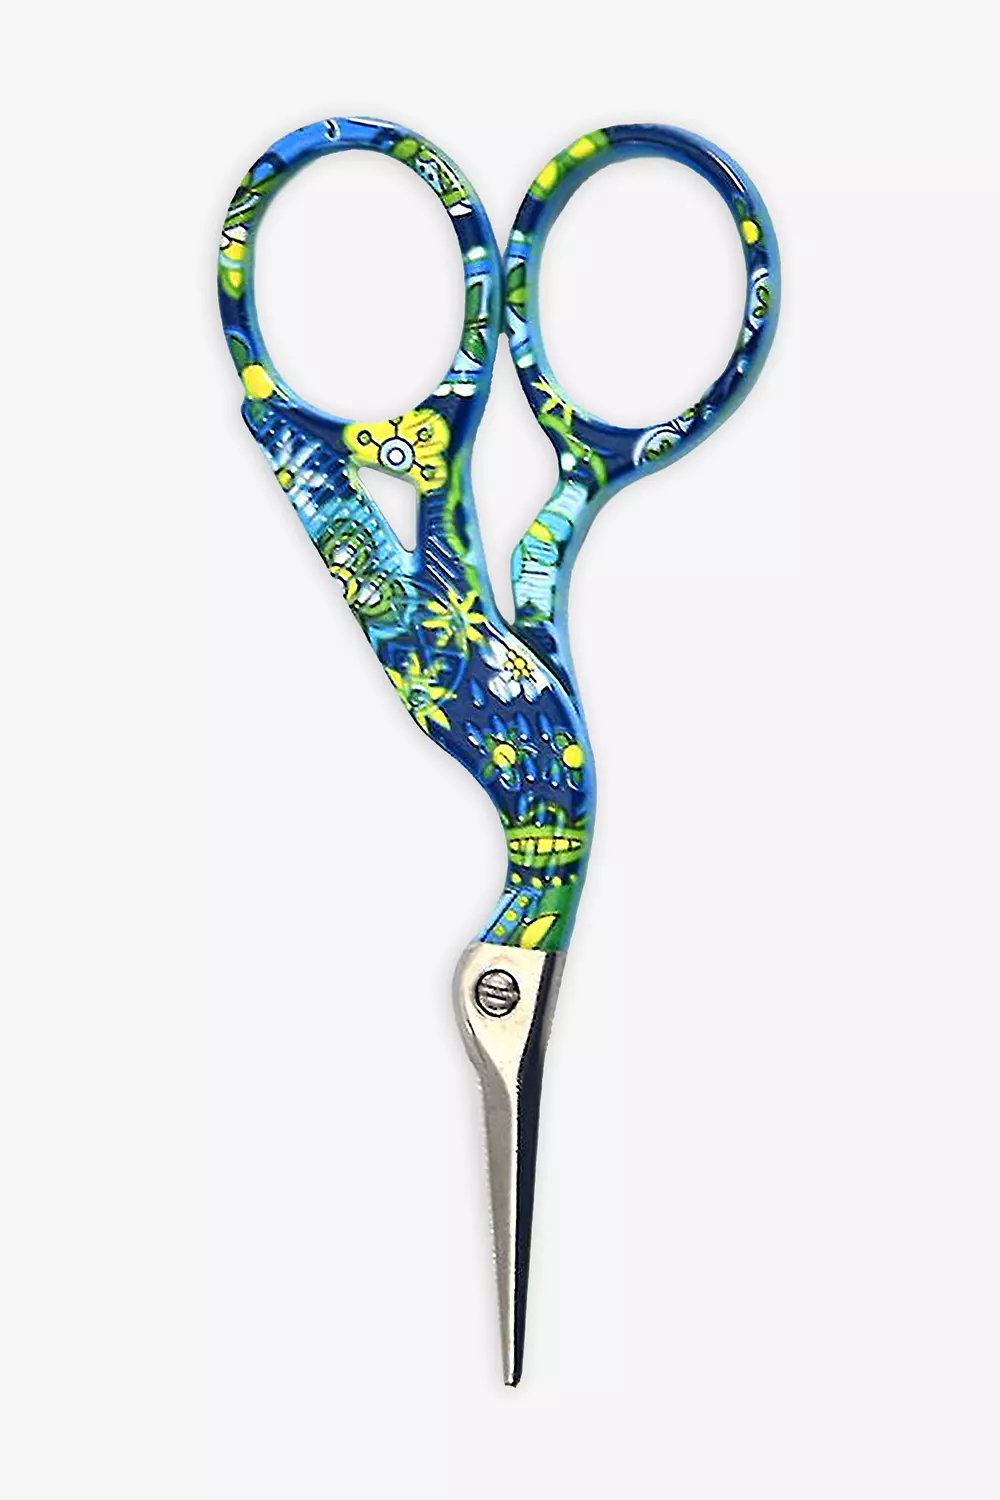 Crane Precision Scissors Sewing Knitting Embroidery 4 Colors Available 